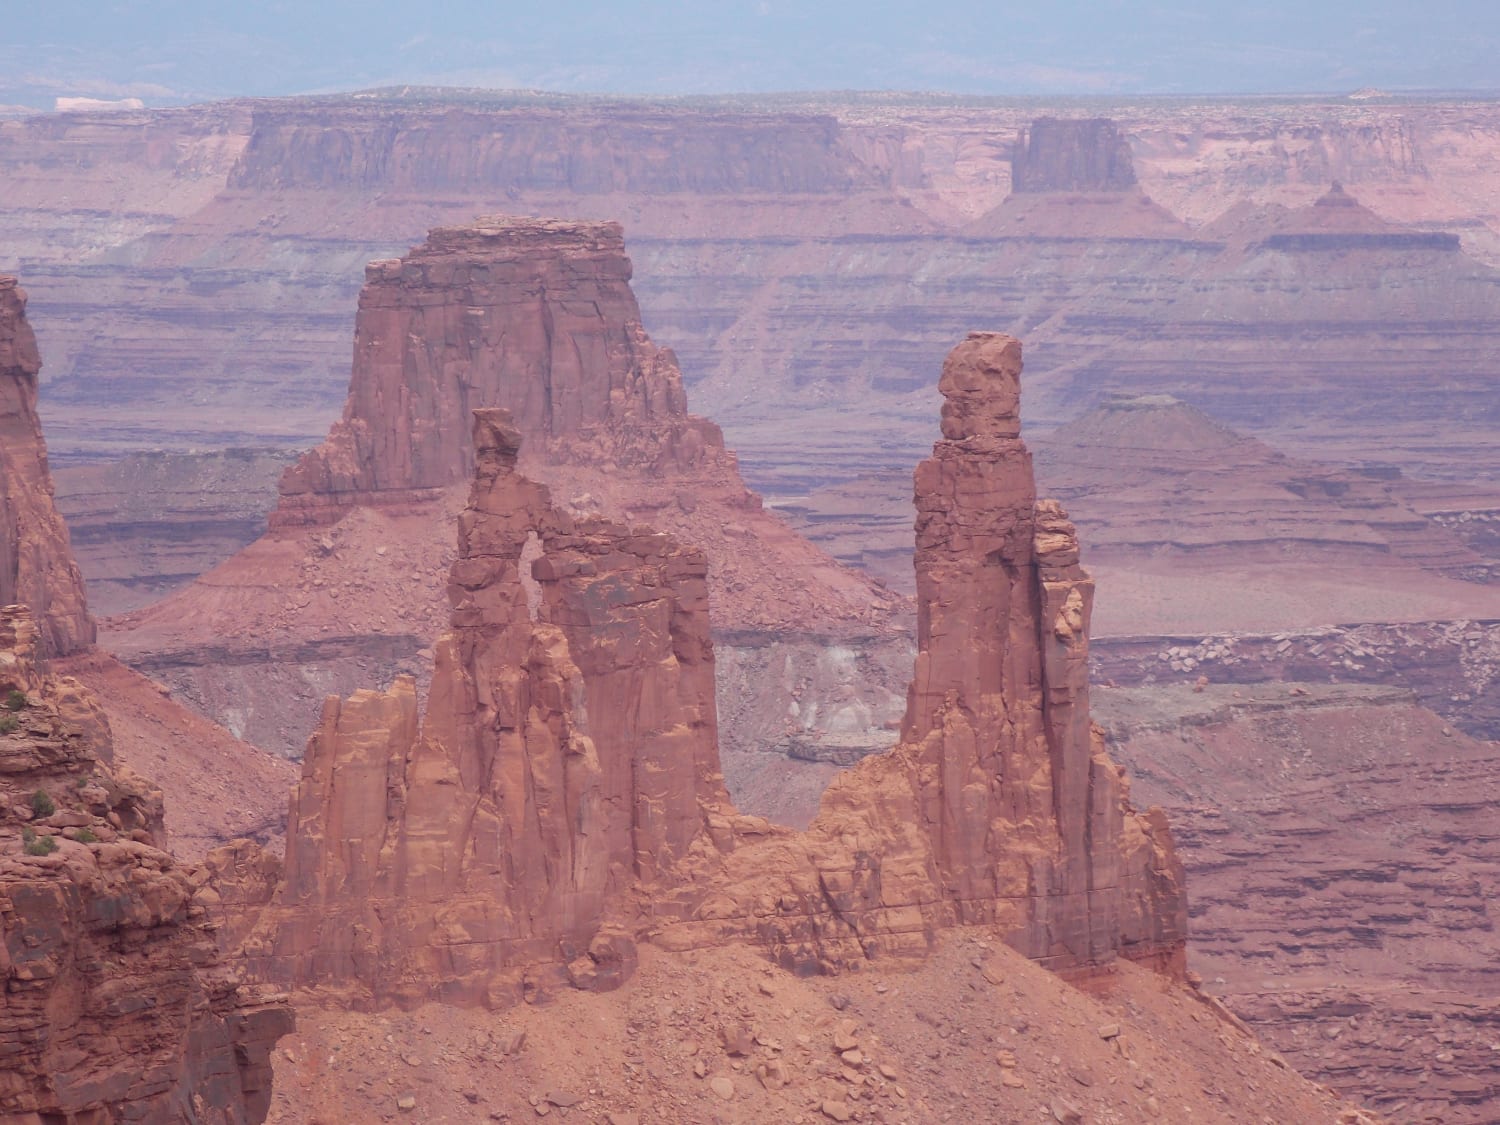 Washer Woman Arch in Canyonlands National Park, Utah